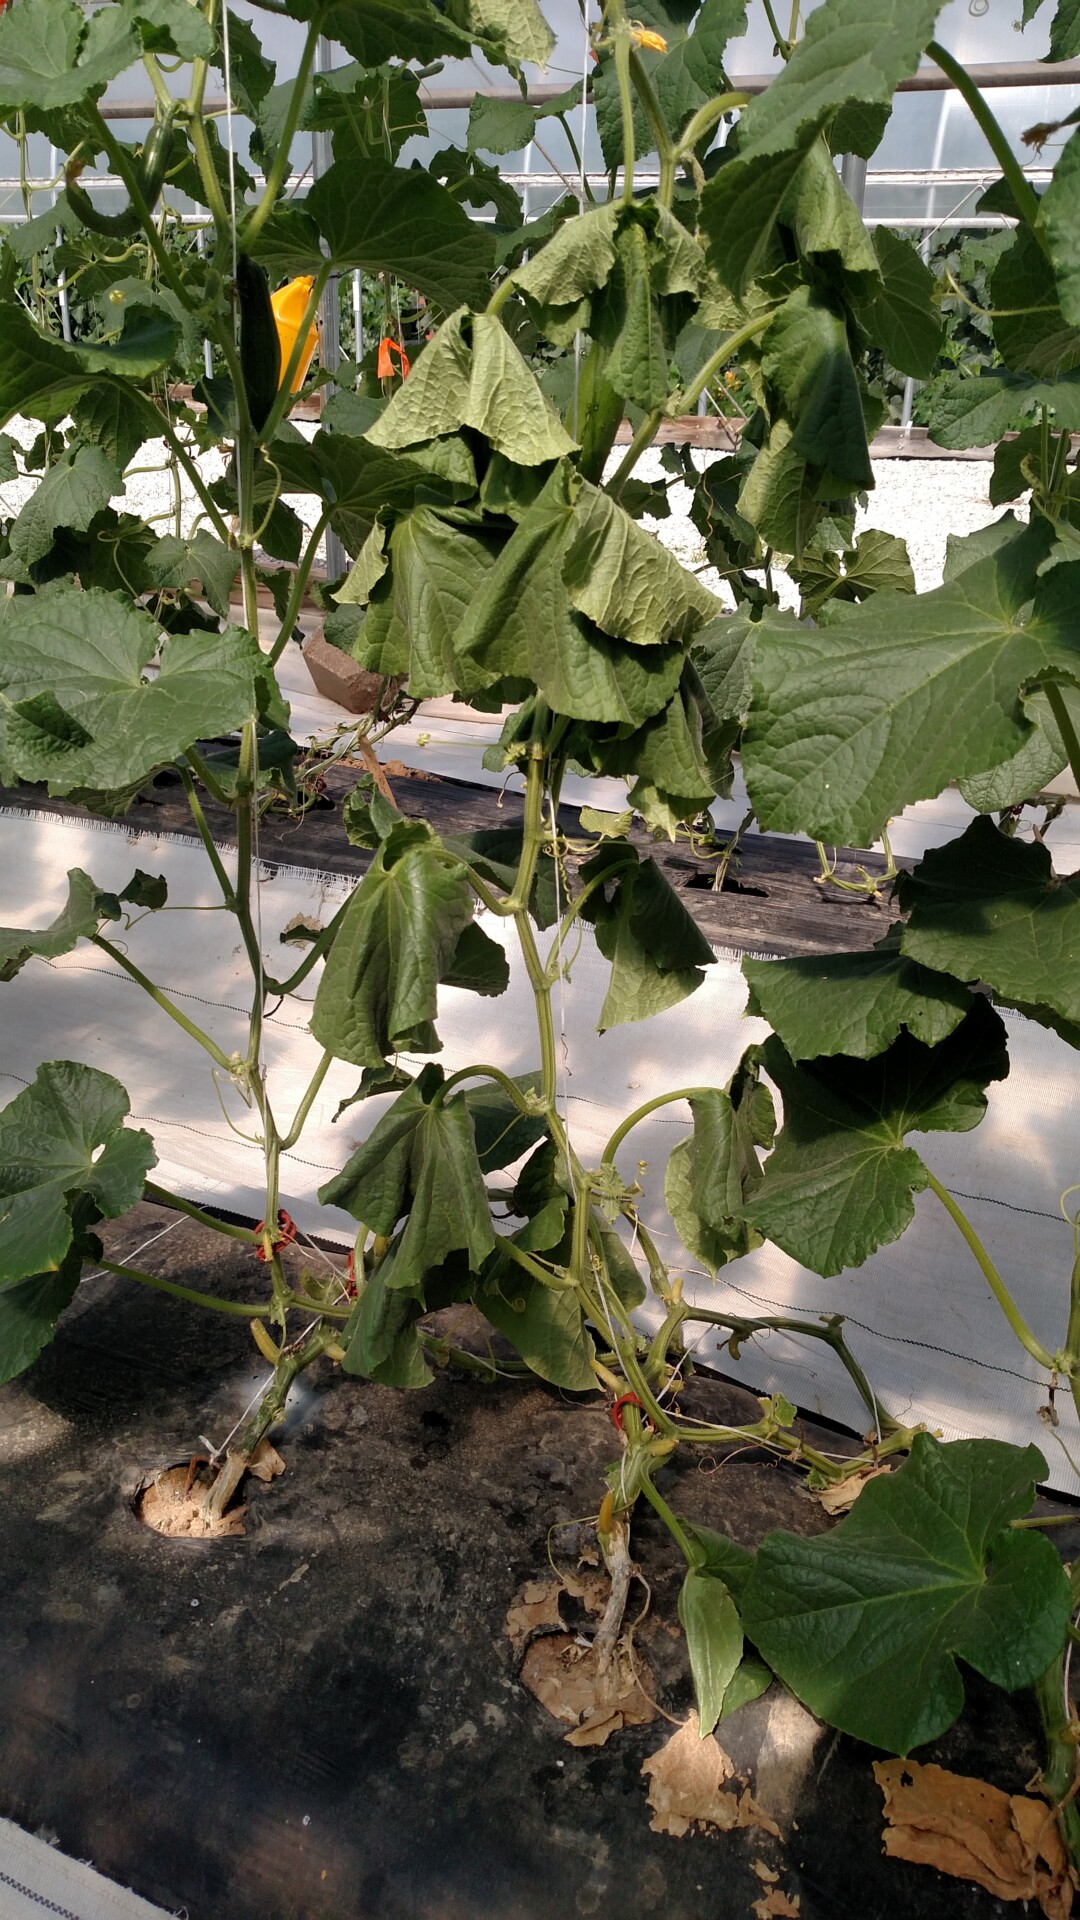 Figure 2. Charcoal rot of cucumber. Plant wilt is visible and lesion on lower stem.